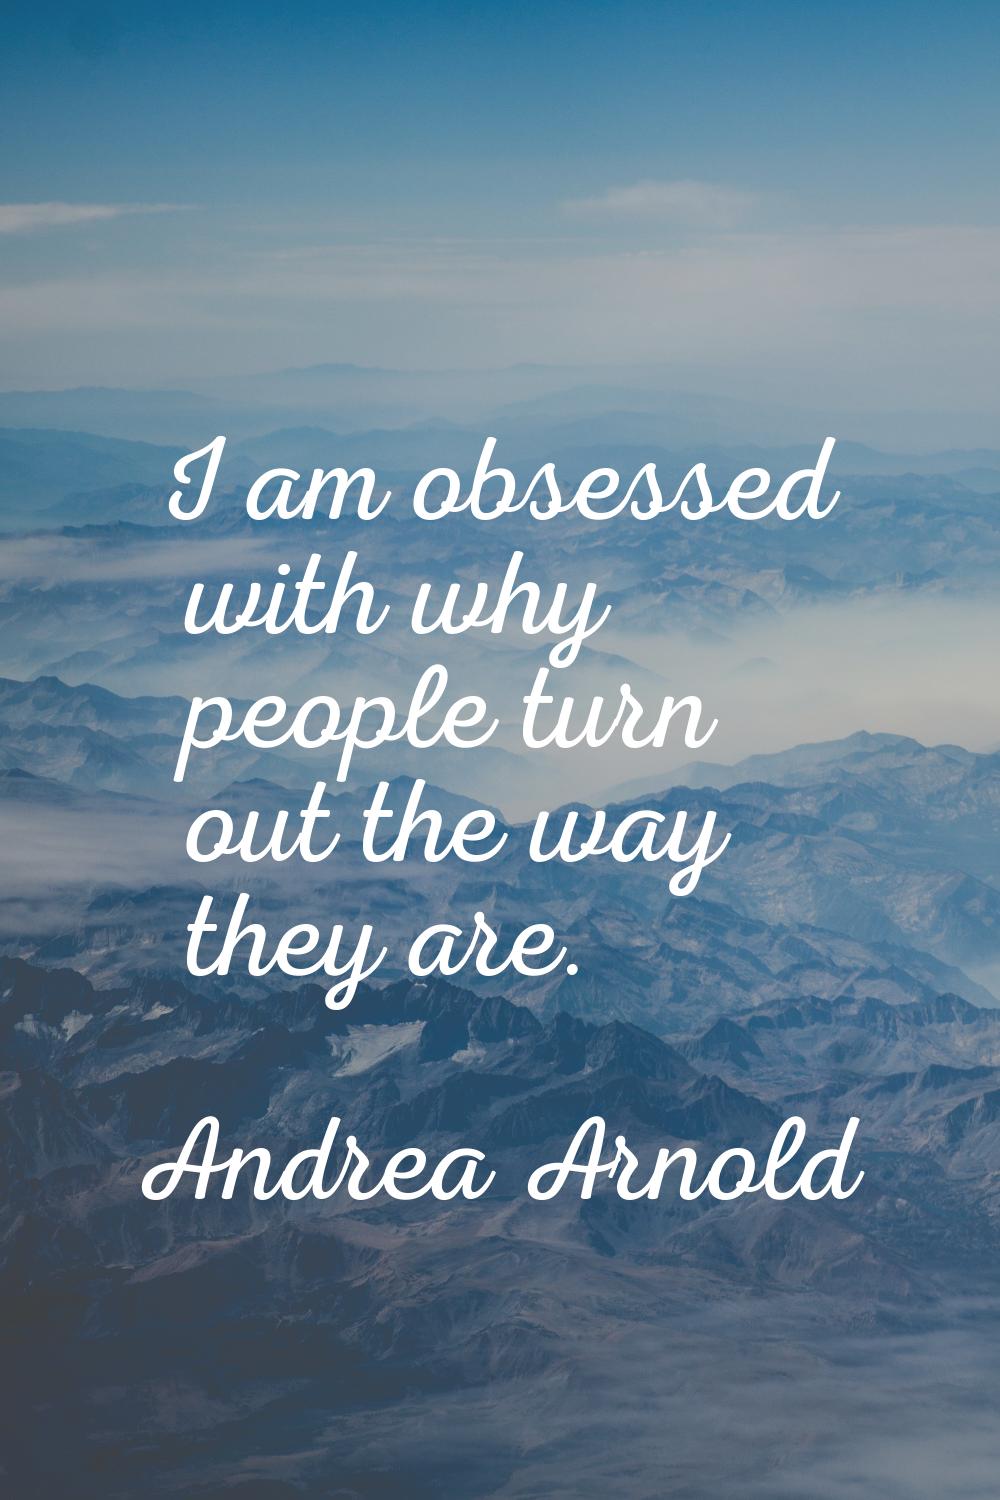 I am obsessed with why people turn out the way they are.